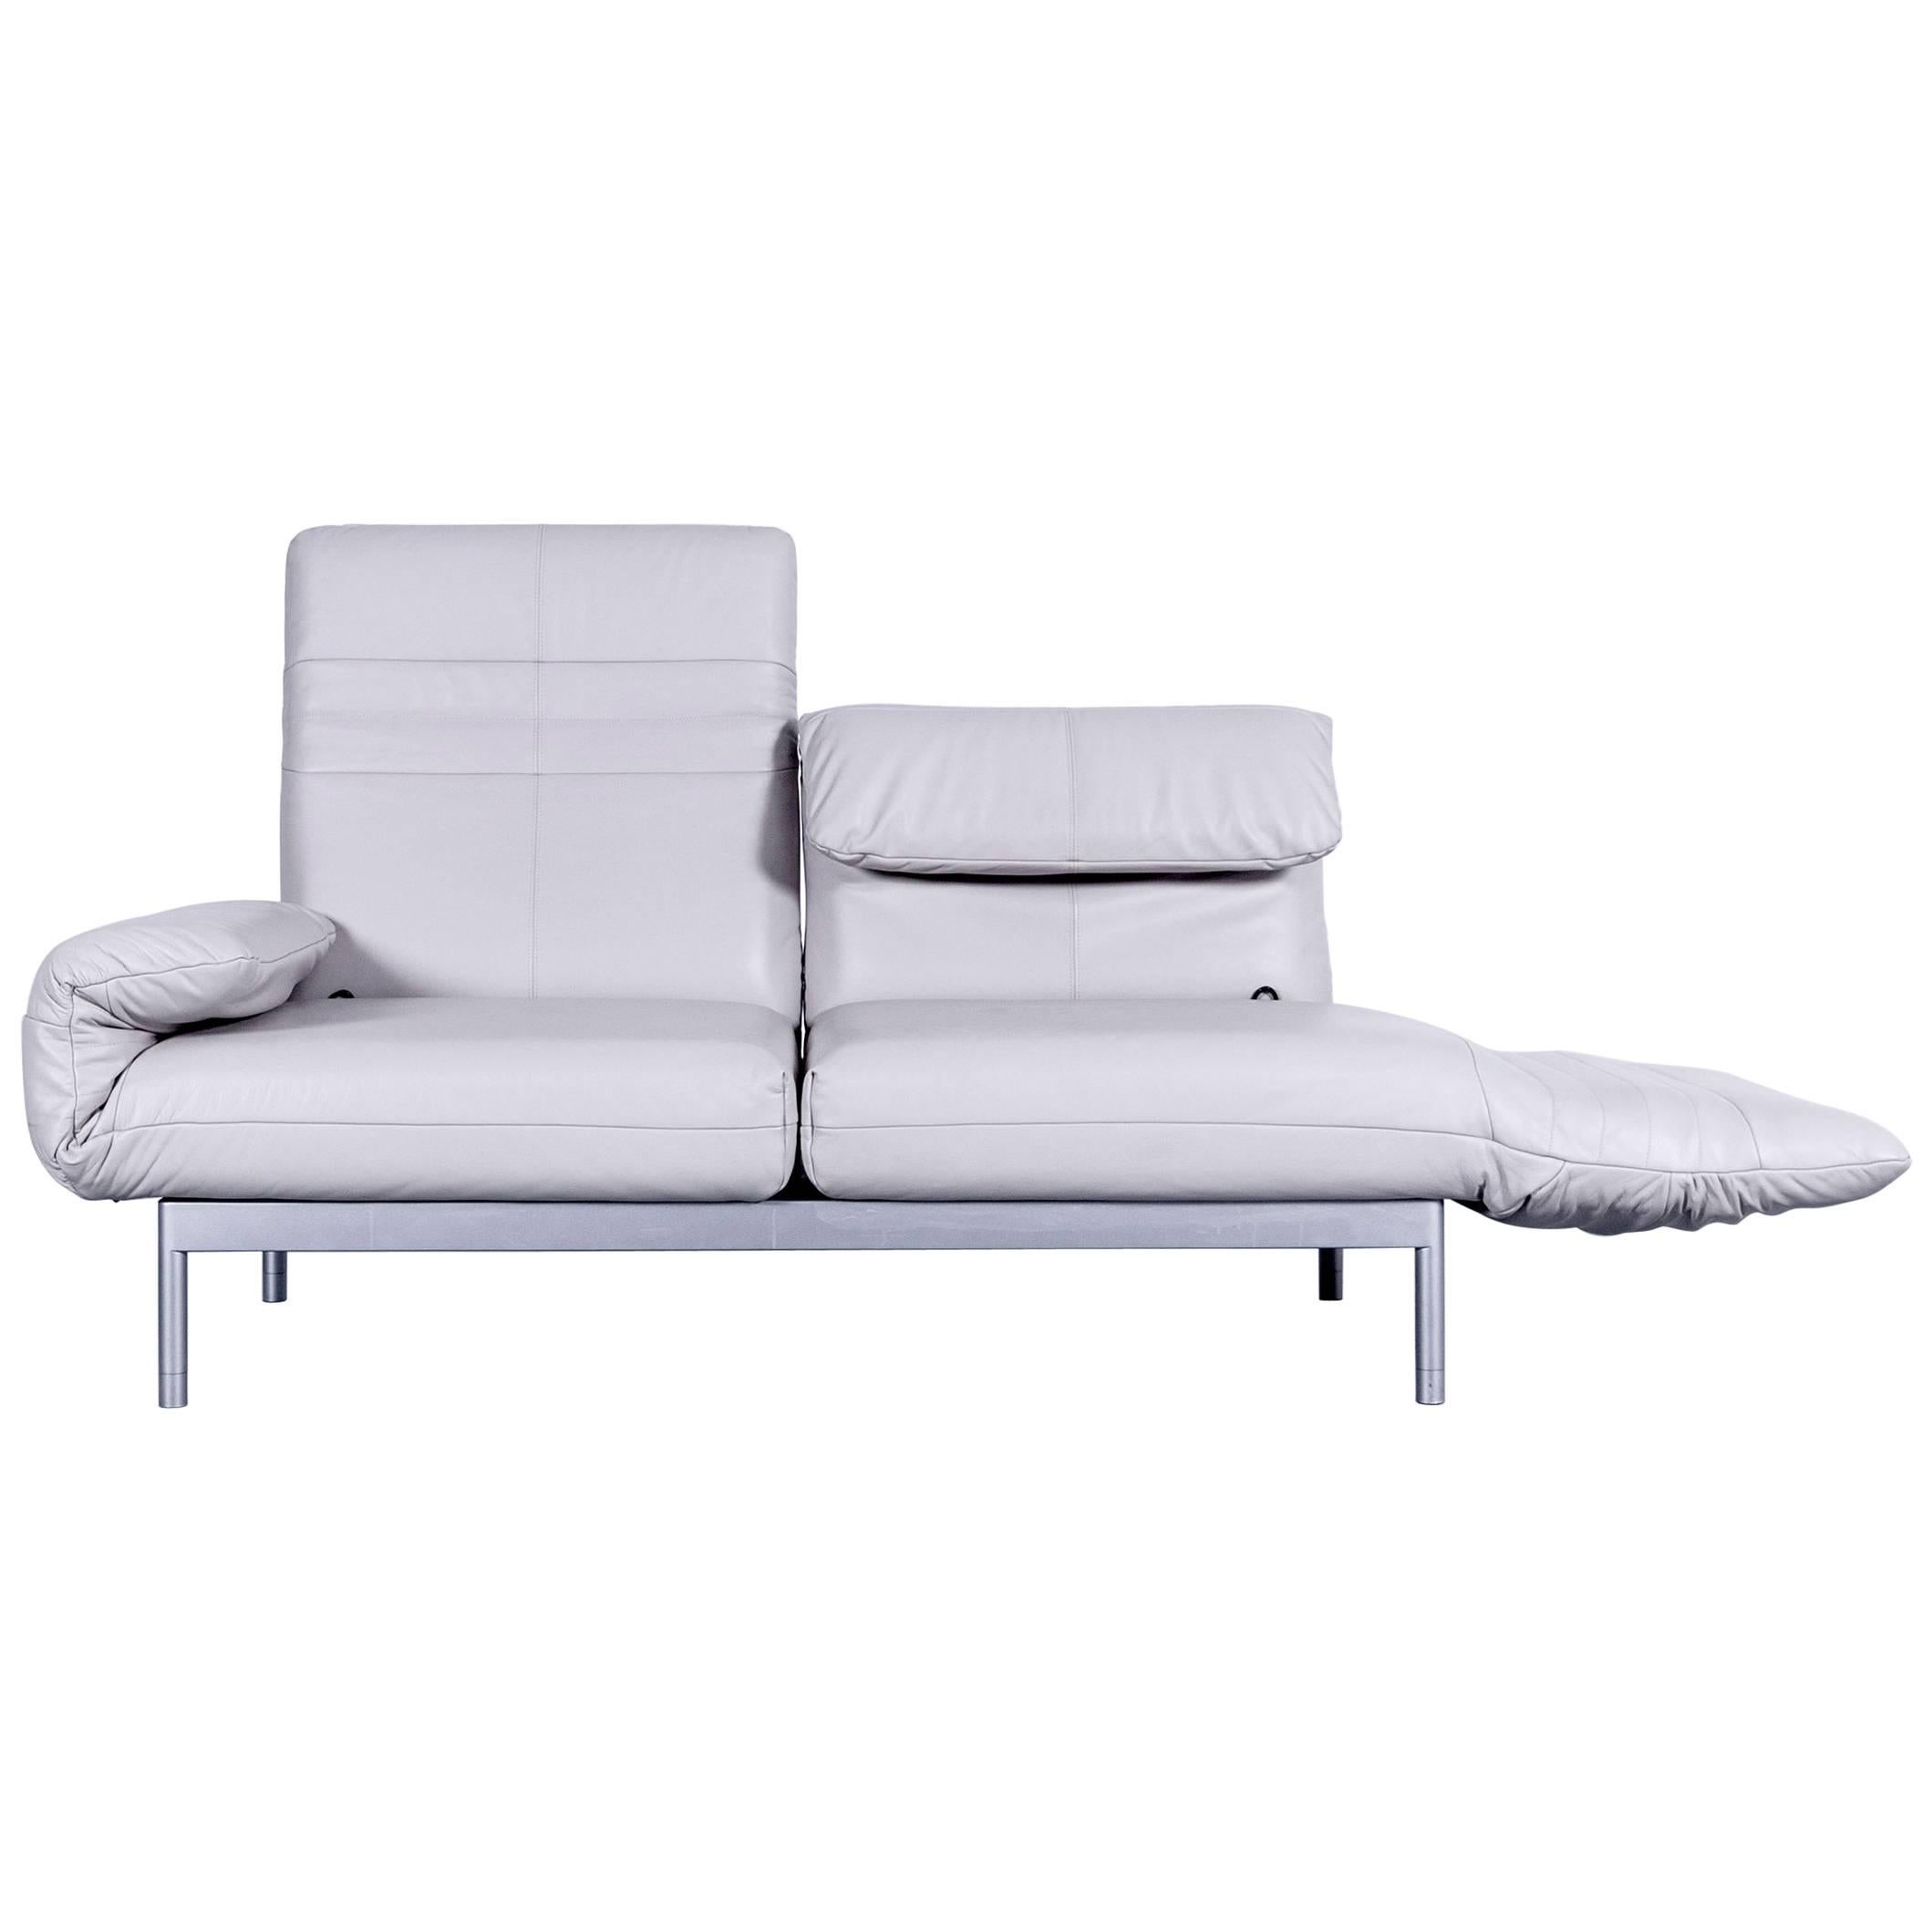 Rolf Benz Plura Designer Sofa Leather Creamy Grey Relax Function Couch